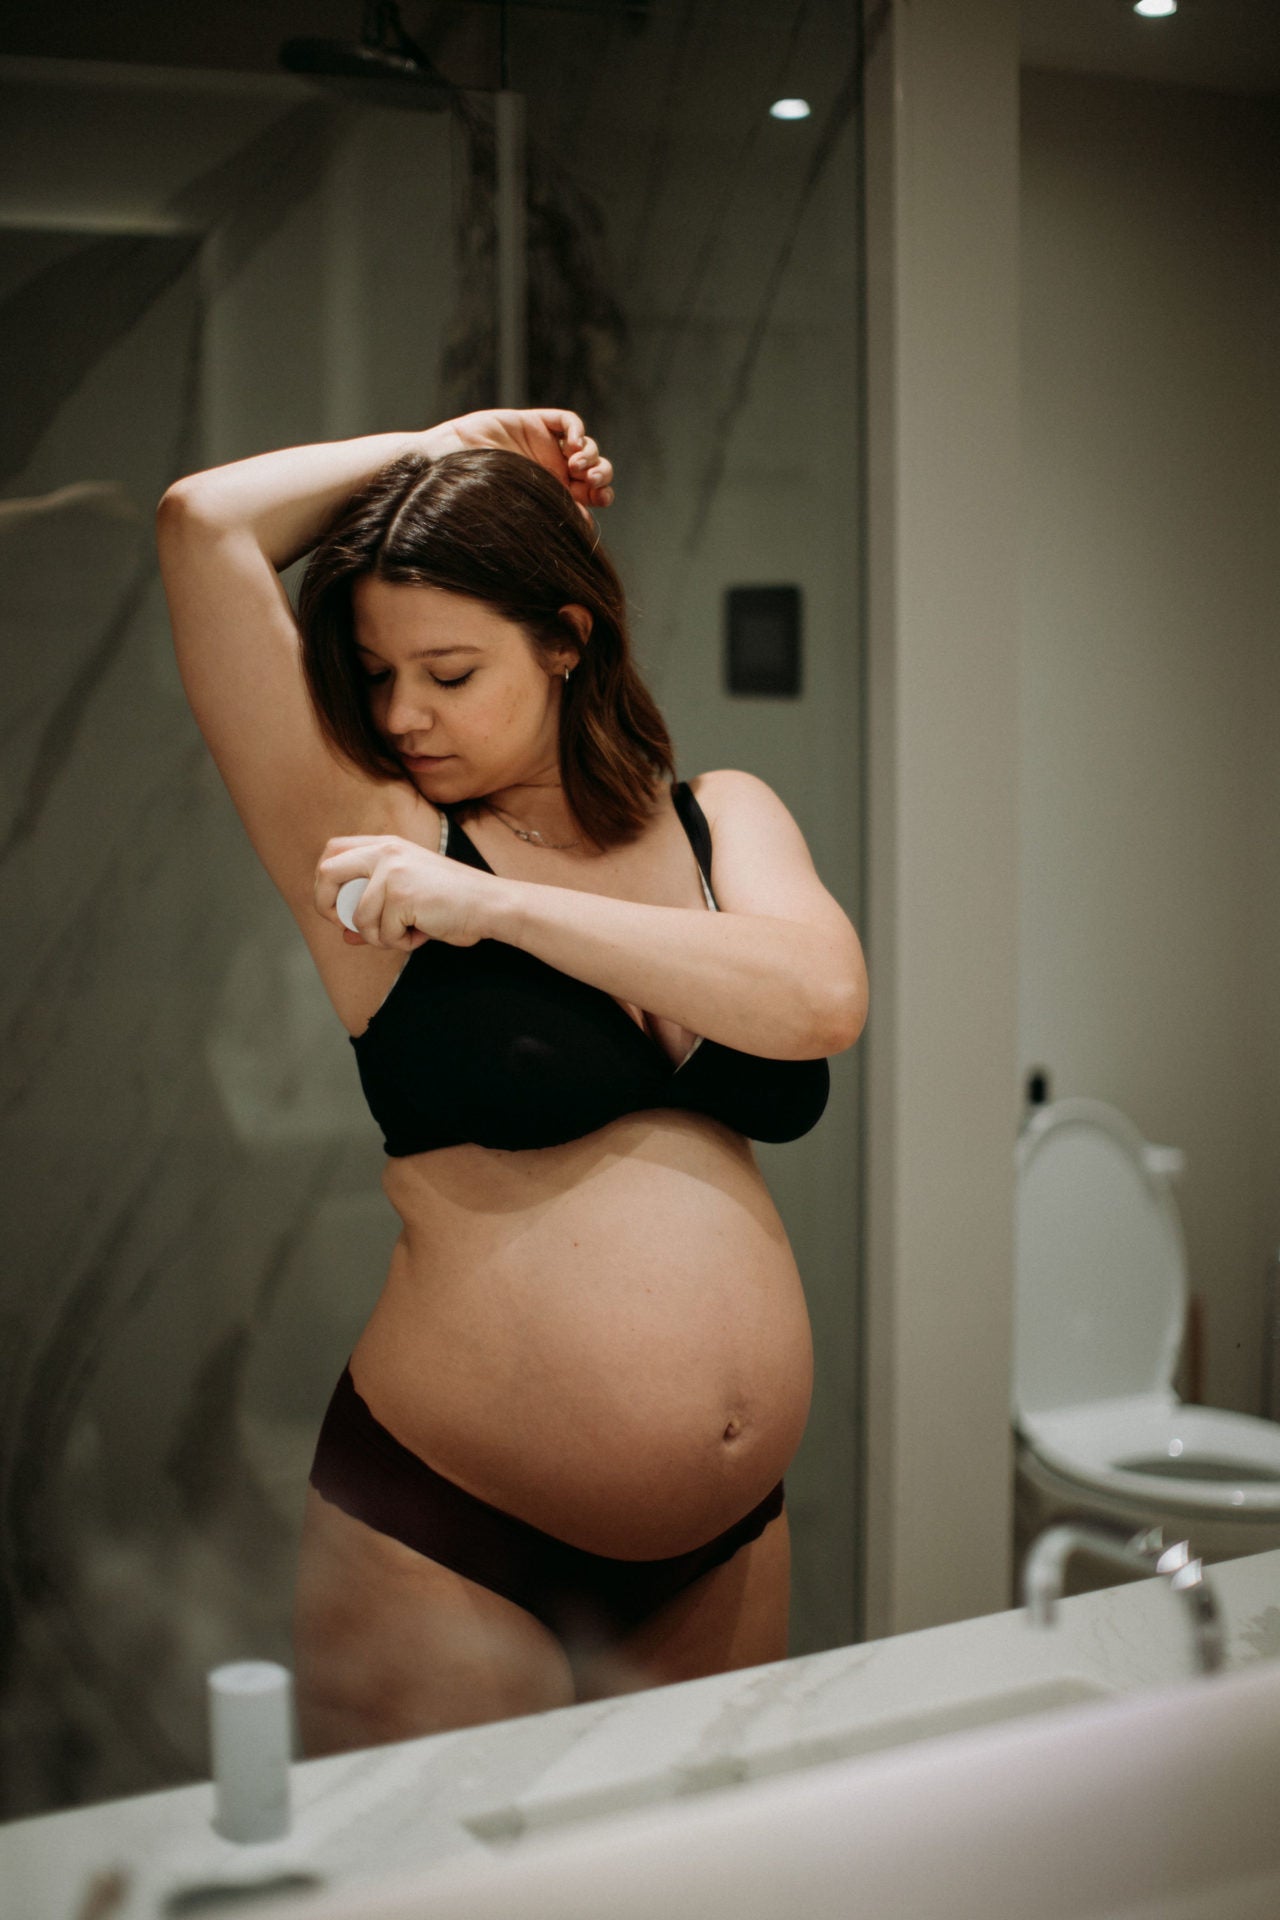 Why does my body odor change during pregnancy?